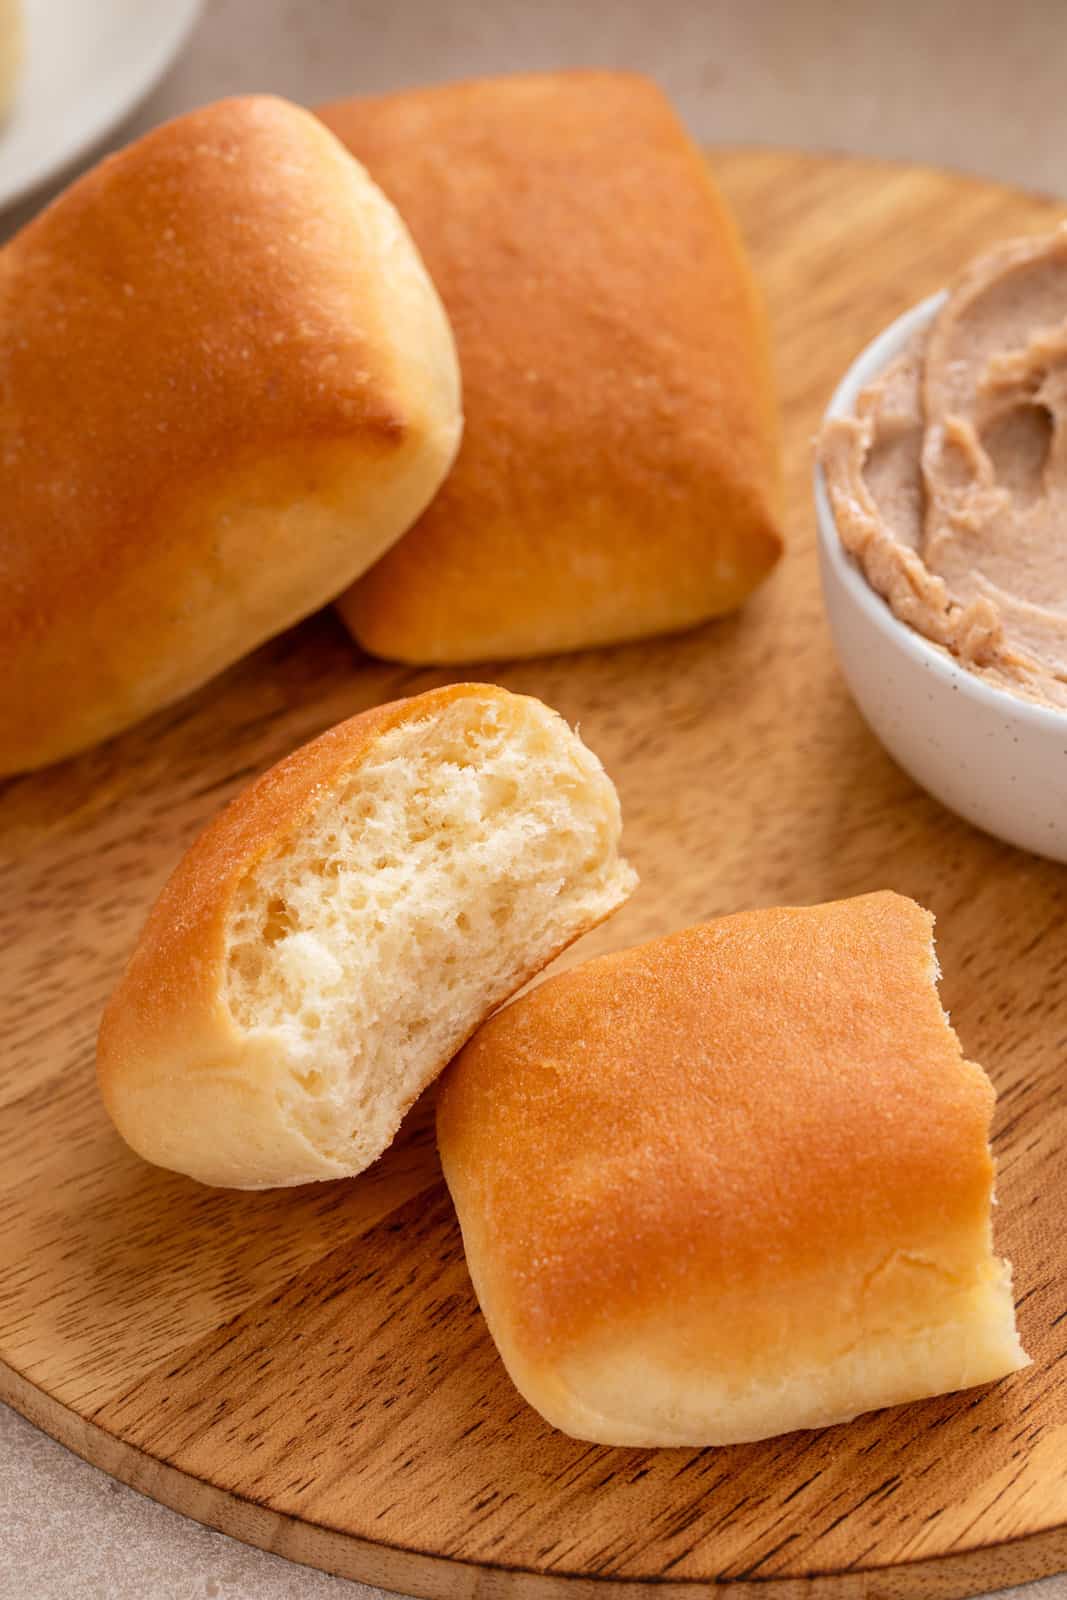 Texas roadhouse rolls arranged on a wooden board by a bowl of cinnamon honey butter. One of the rolls is torn in half.